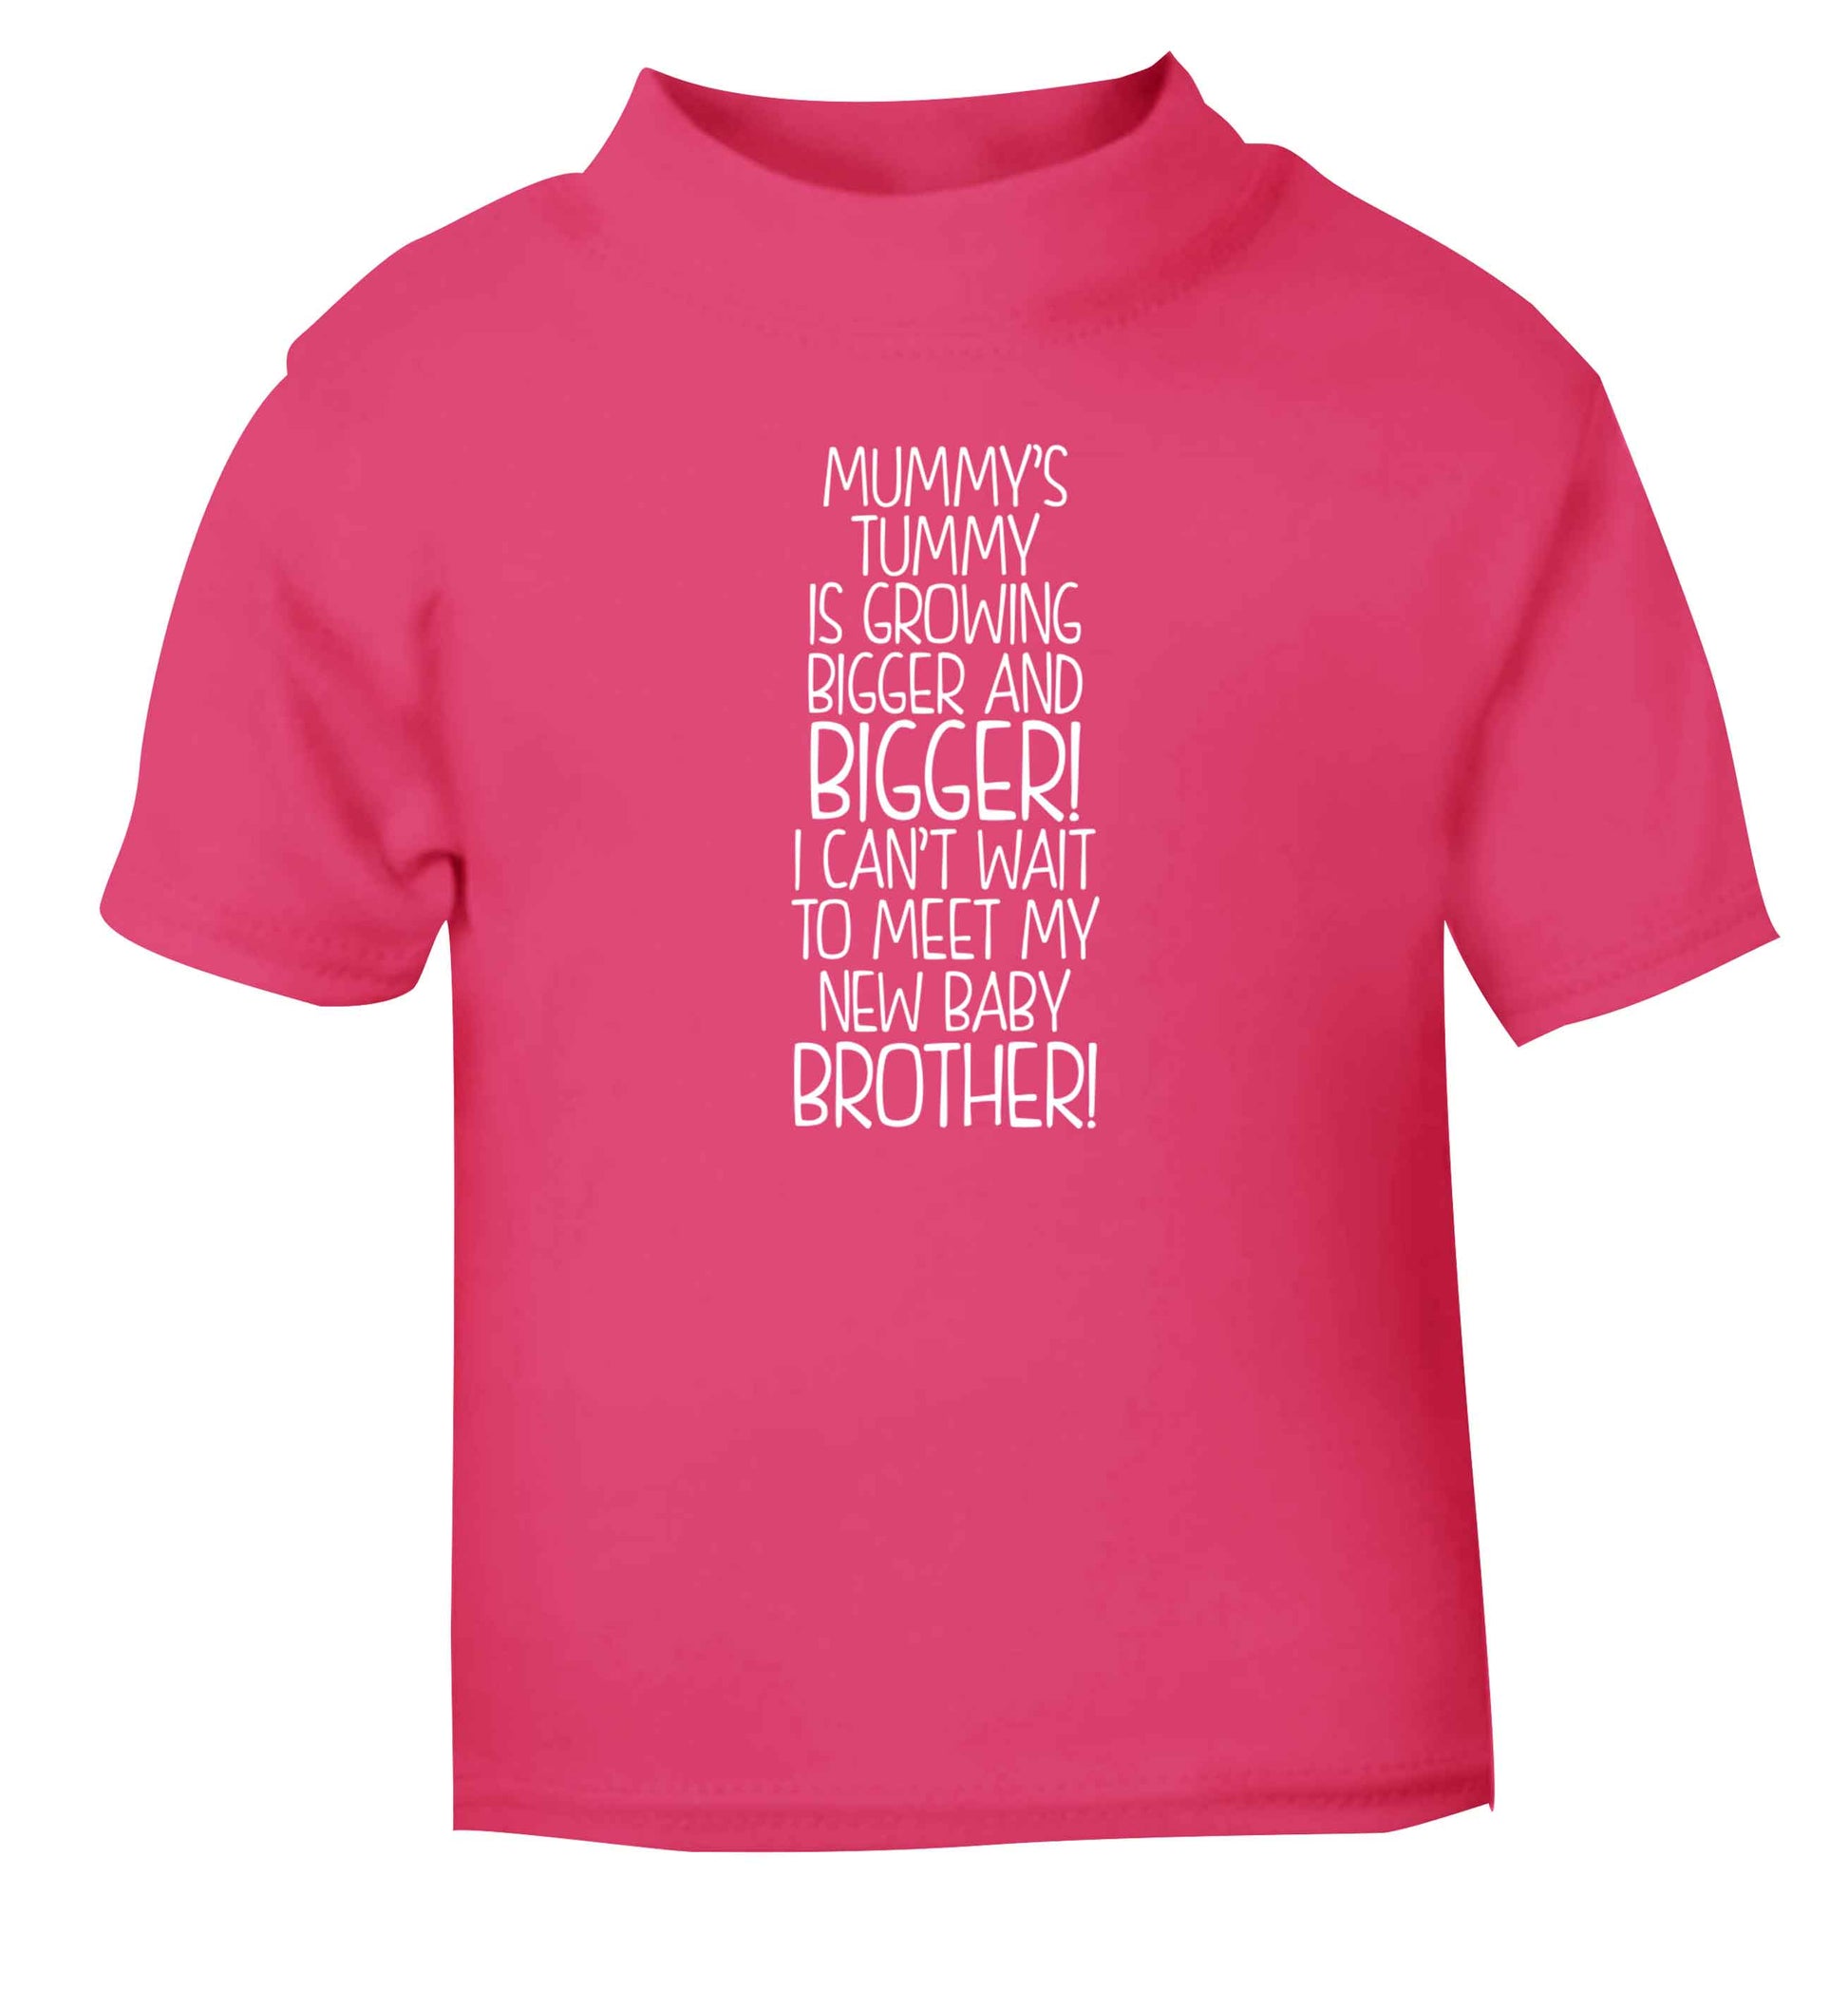 Mummy's tummy is growing bigger and bigger I can't wait to meet my new baby brother! pink Baby Toddler Tshirt 2 Years